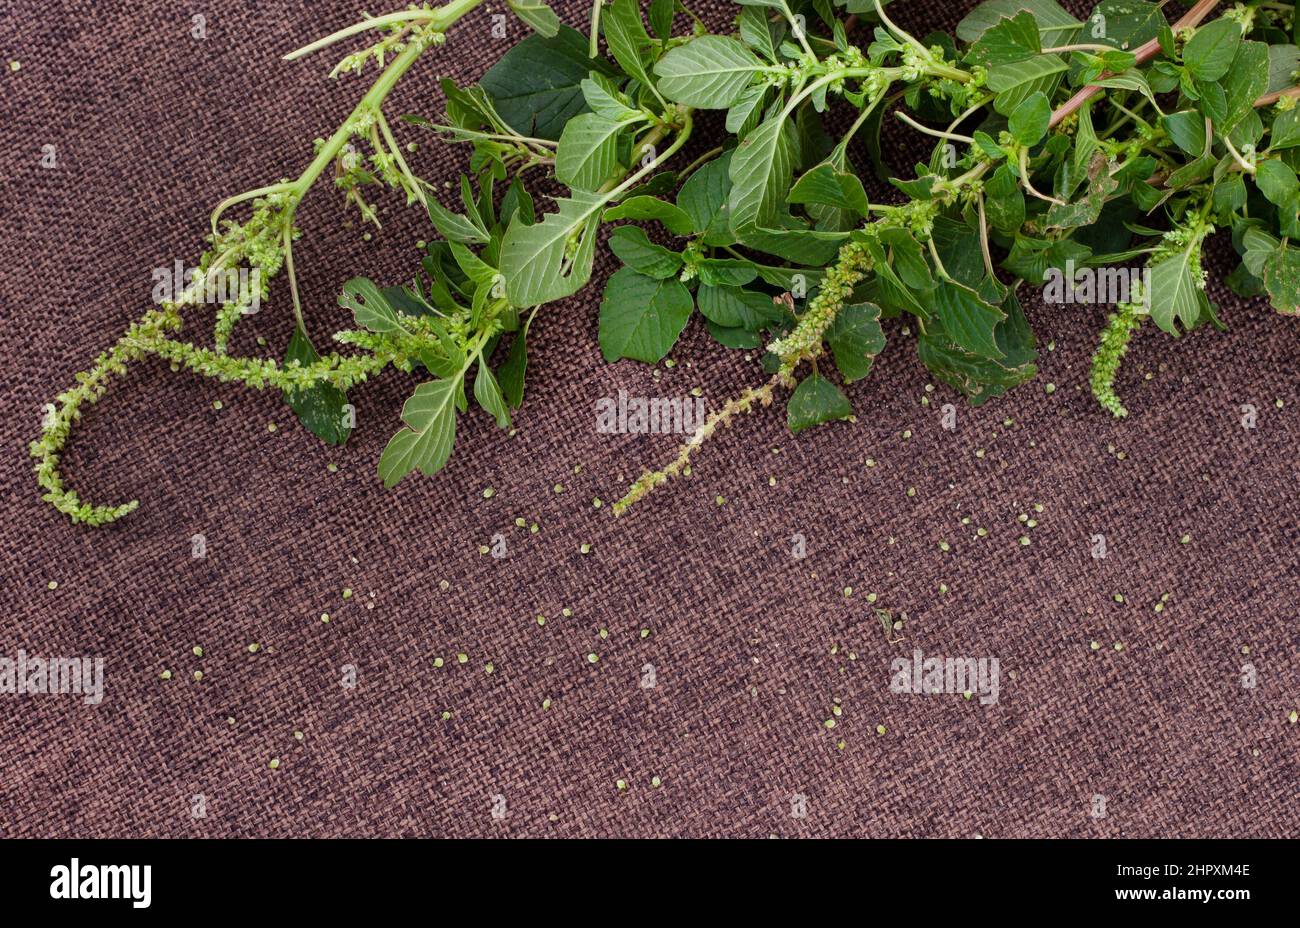 Green amaranth plant flowering on rustic surface with selective focus Stock Photo